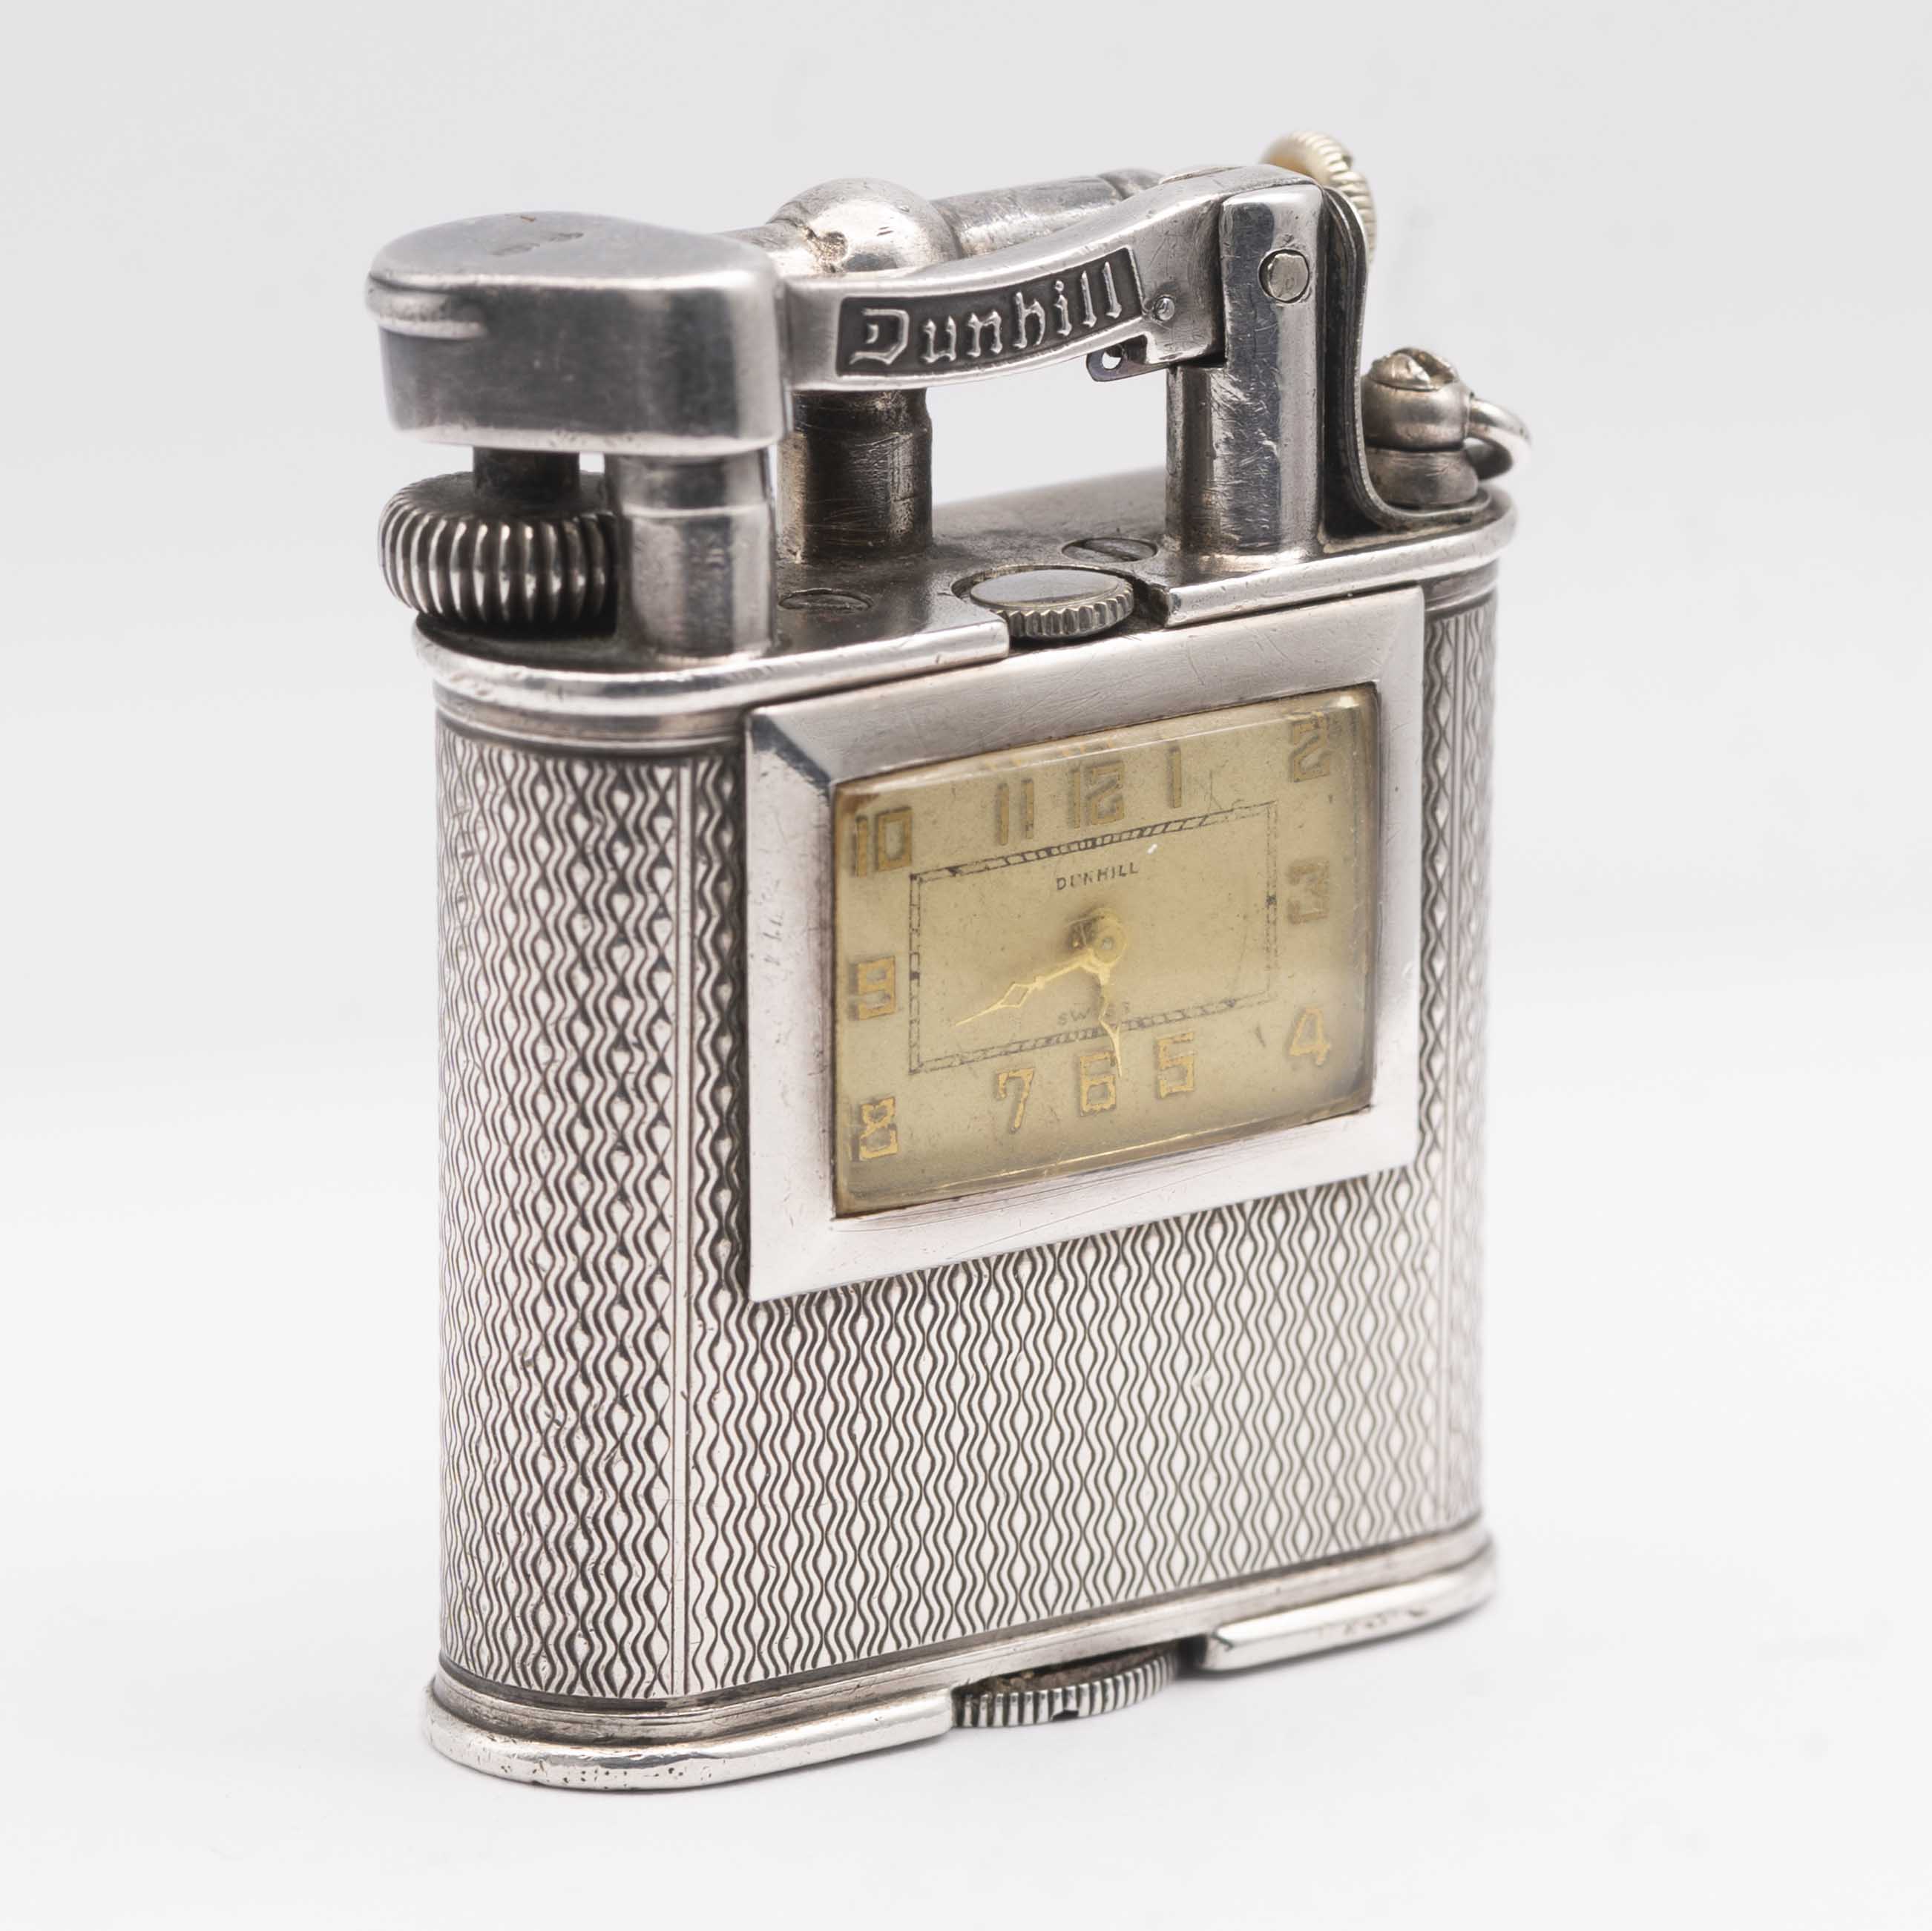 A RARE SOLID SILVER DUNHILL UNIQUE 'A' SELF WINDING WATCH LIGHTER CIRCA 1930s Movement: Manual - Image 3 of 7